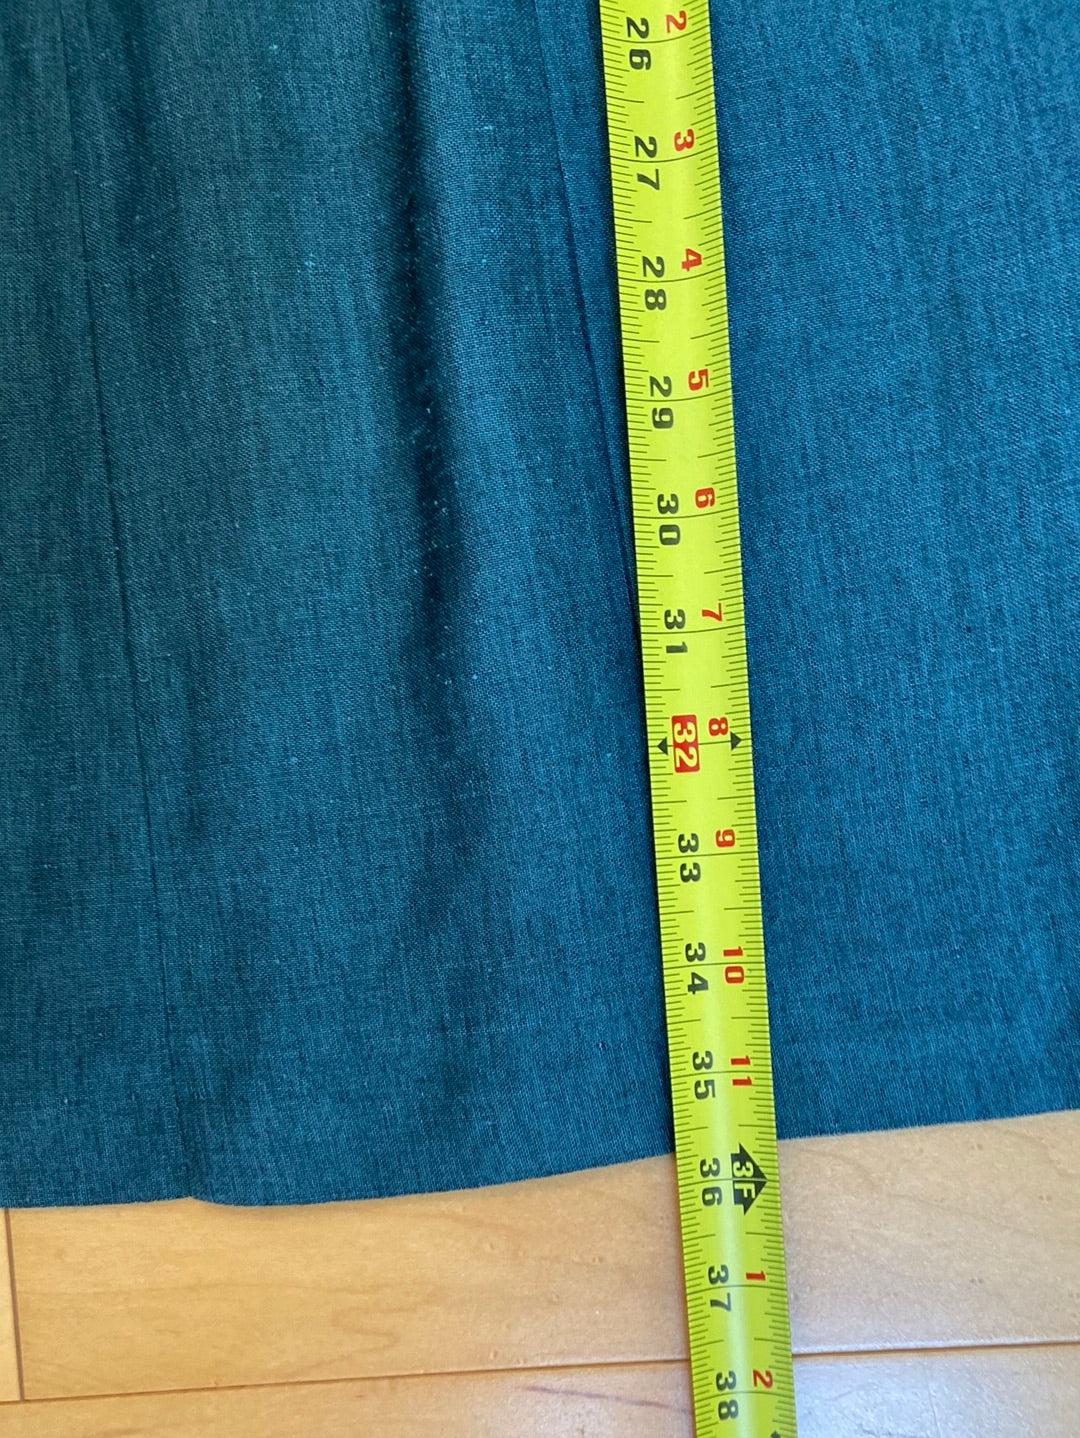 TEAL TANK Laura Ashley Size 4